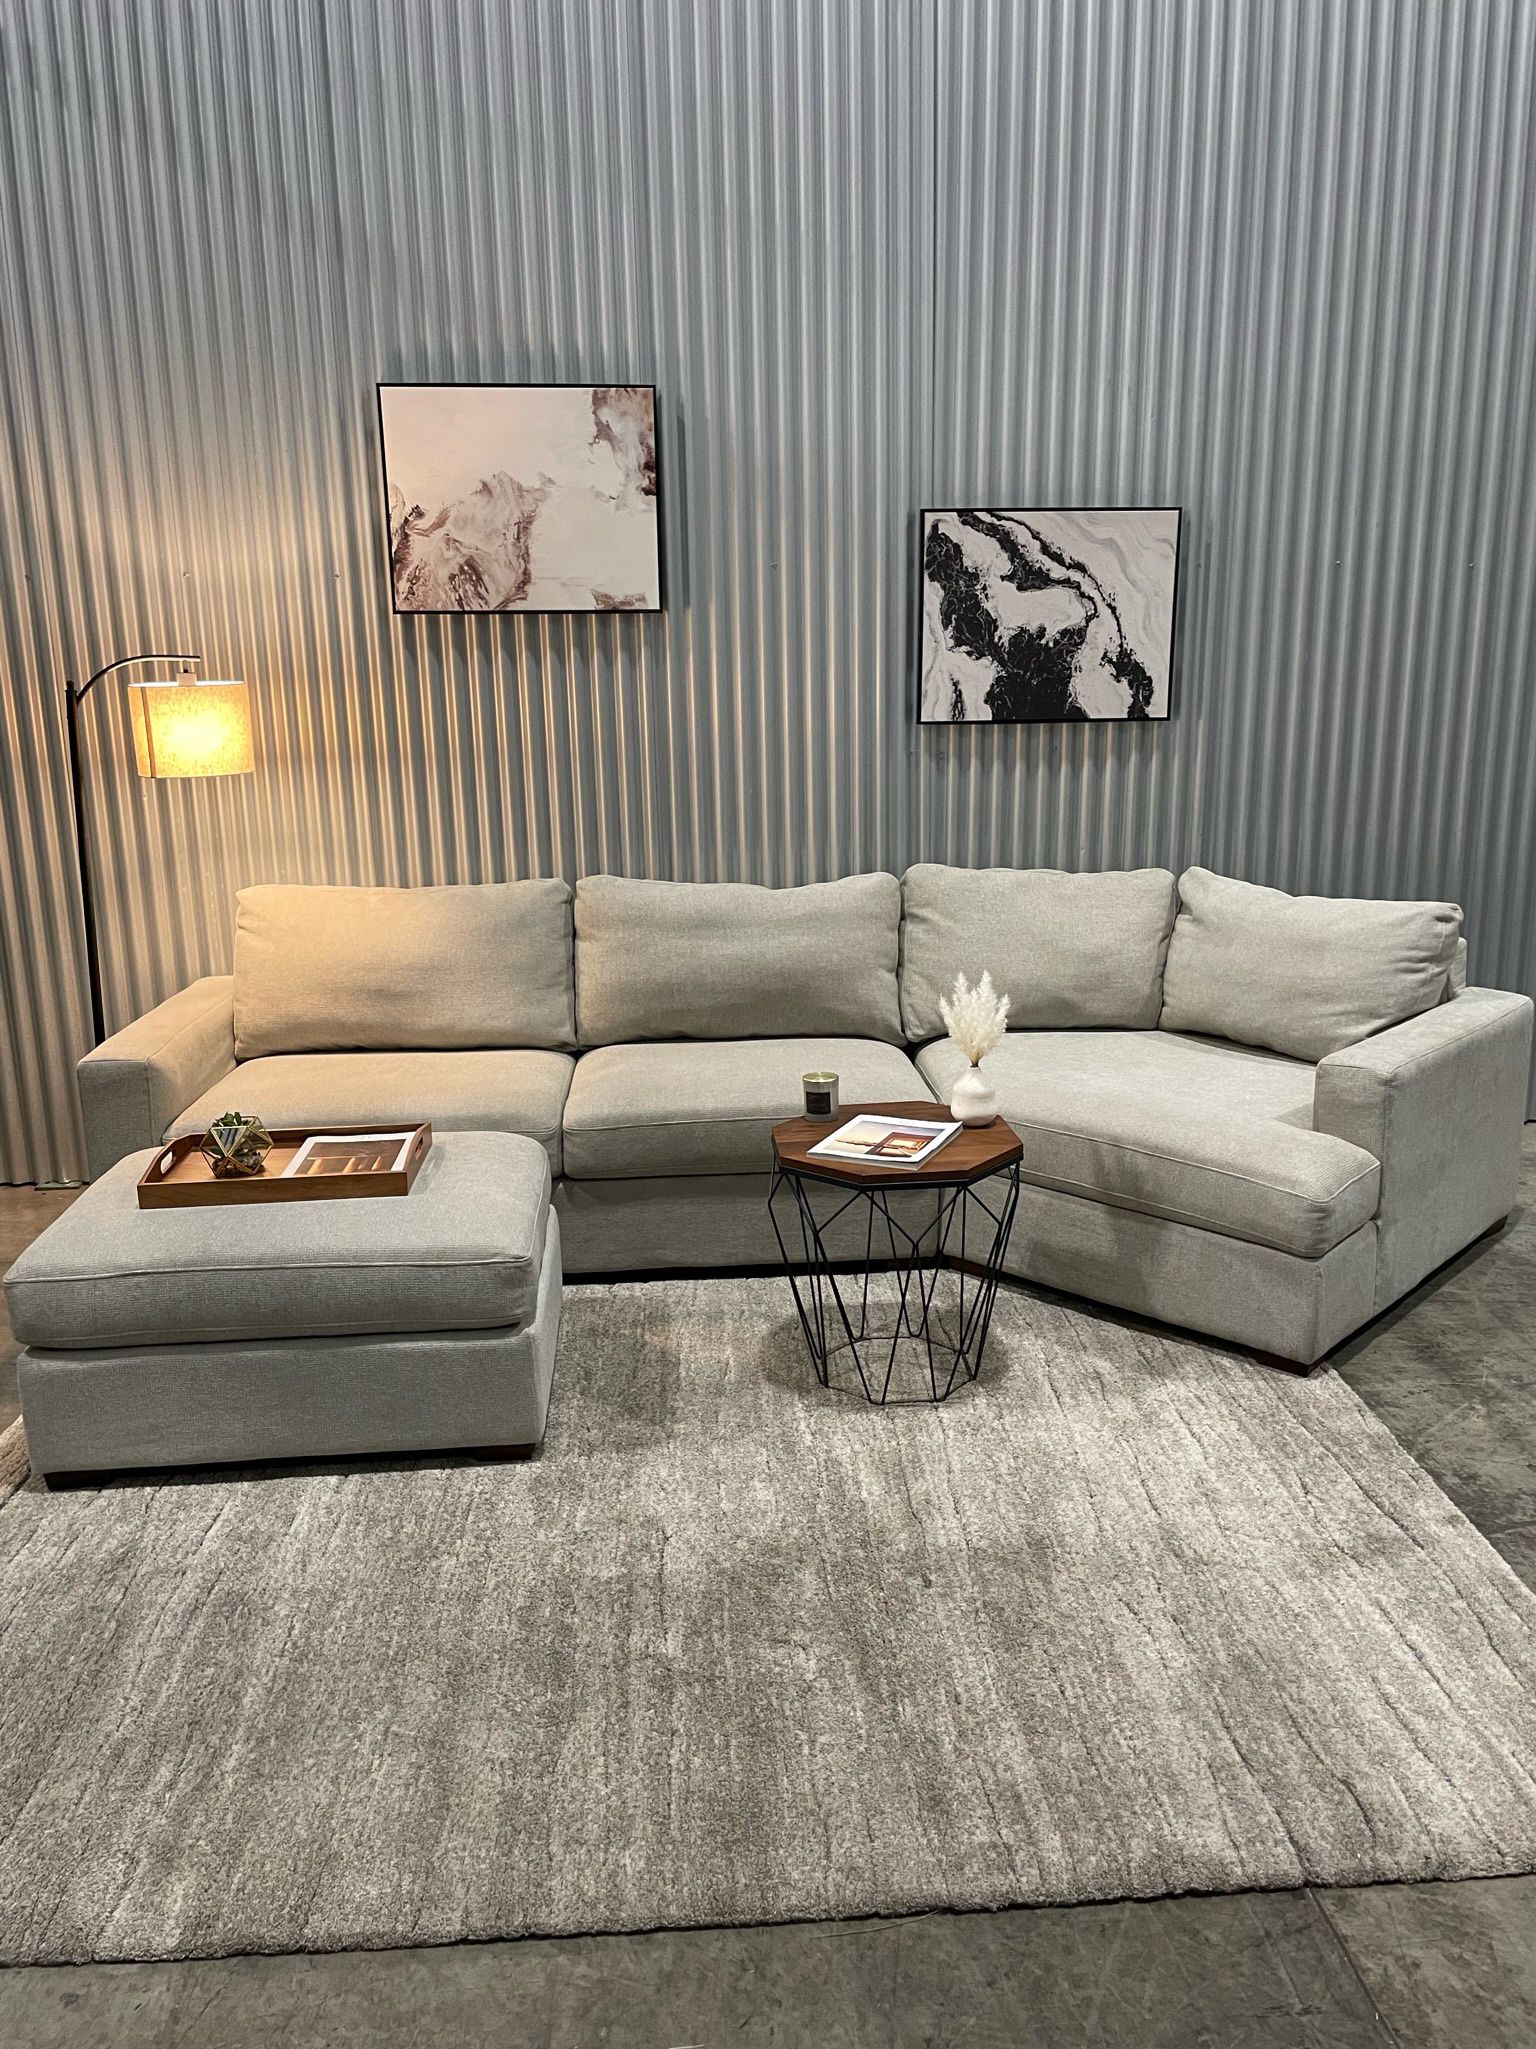 Thomasville Ezra Fabric Sectional with Ottoman - DELIVERY AVAILABLE 🚚